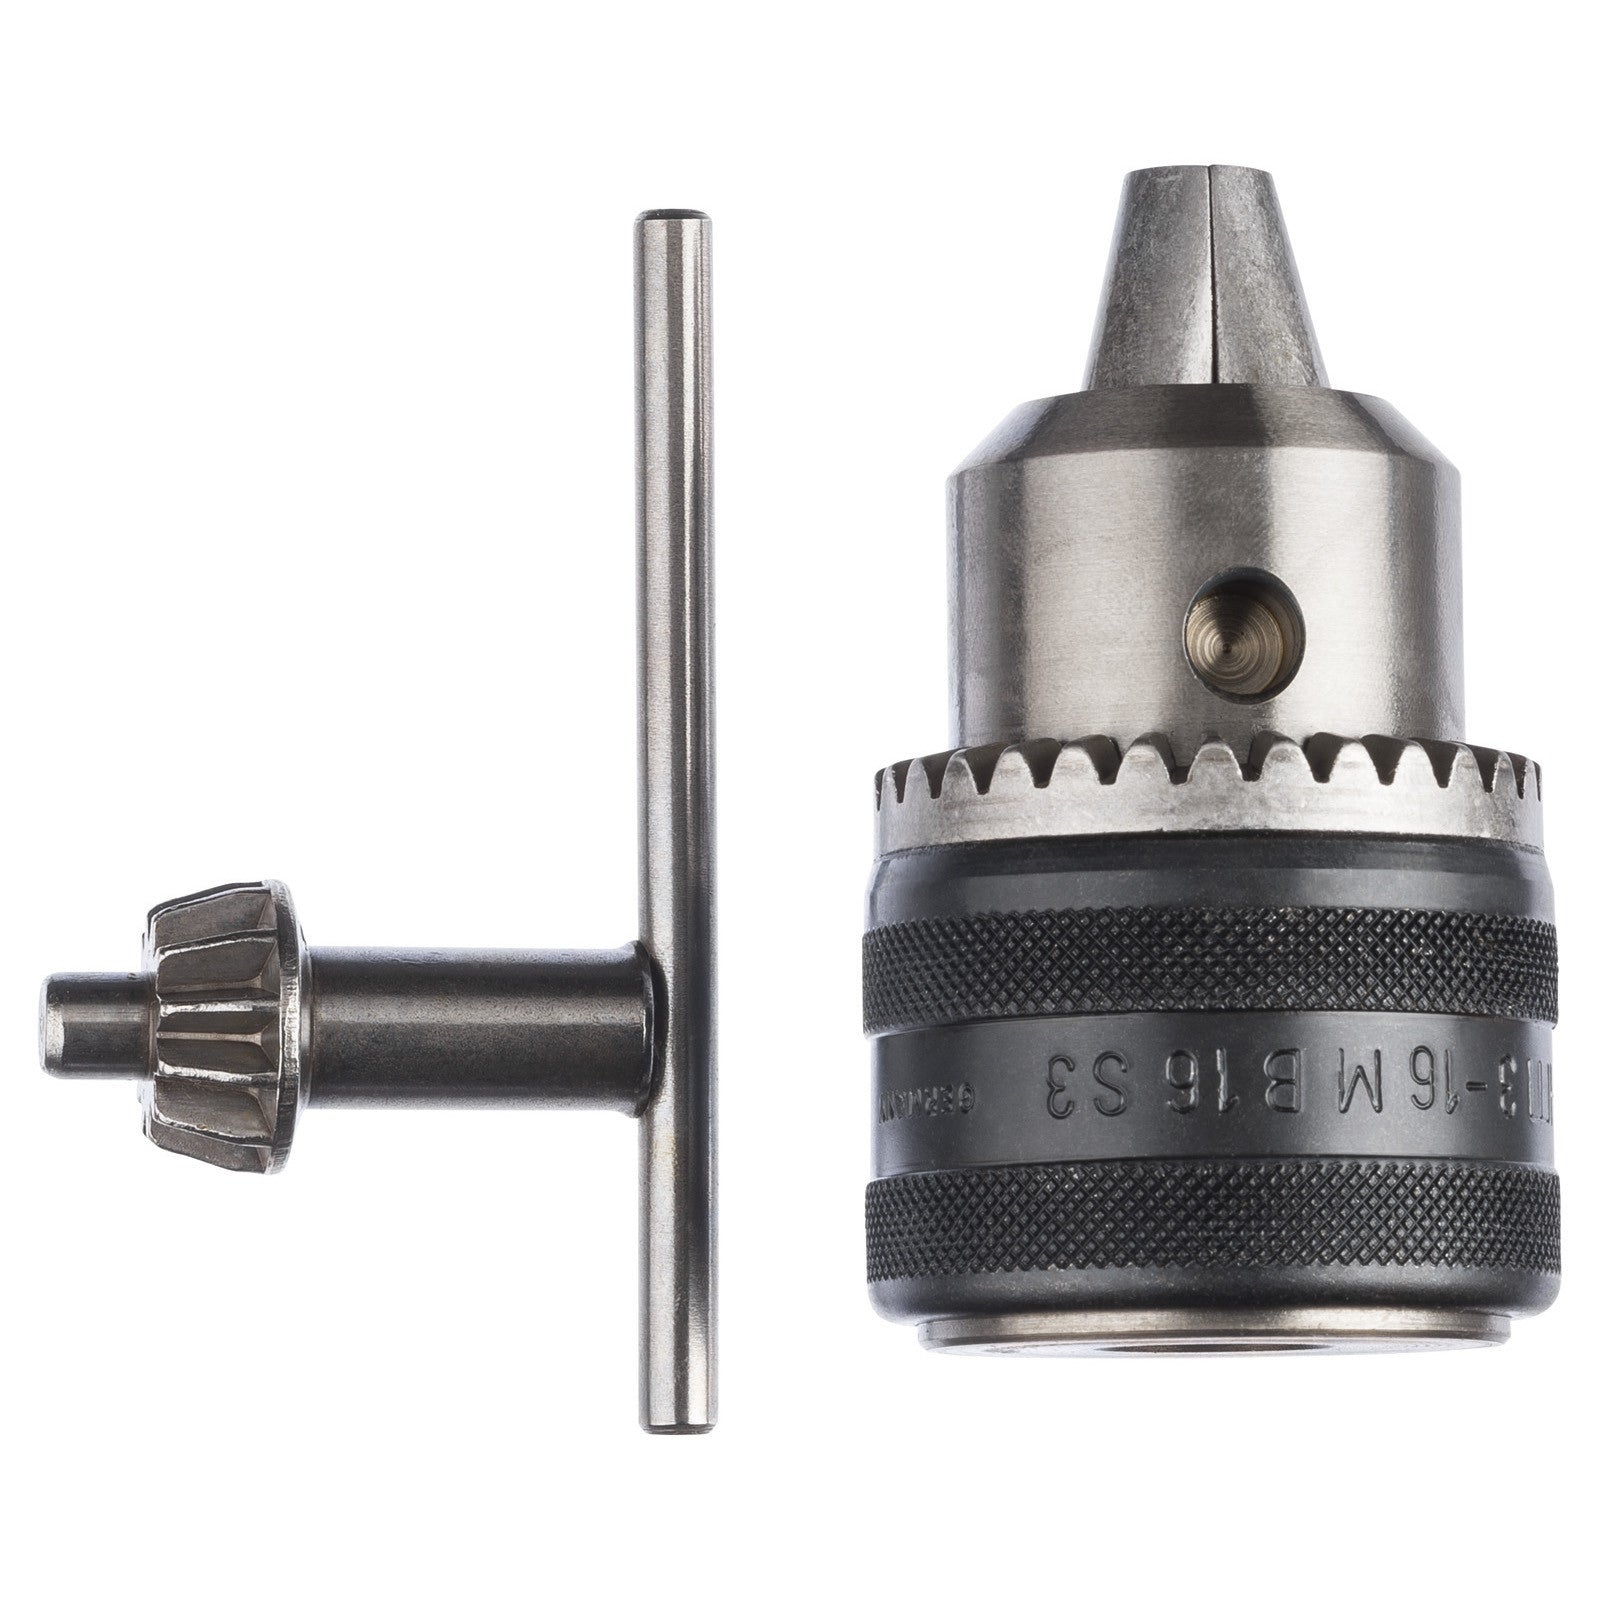 Bosch Keyed chucks up to 16 mm 3 16 mm, B-16 2608571020 Power Tool Services